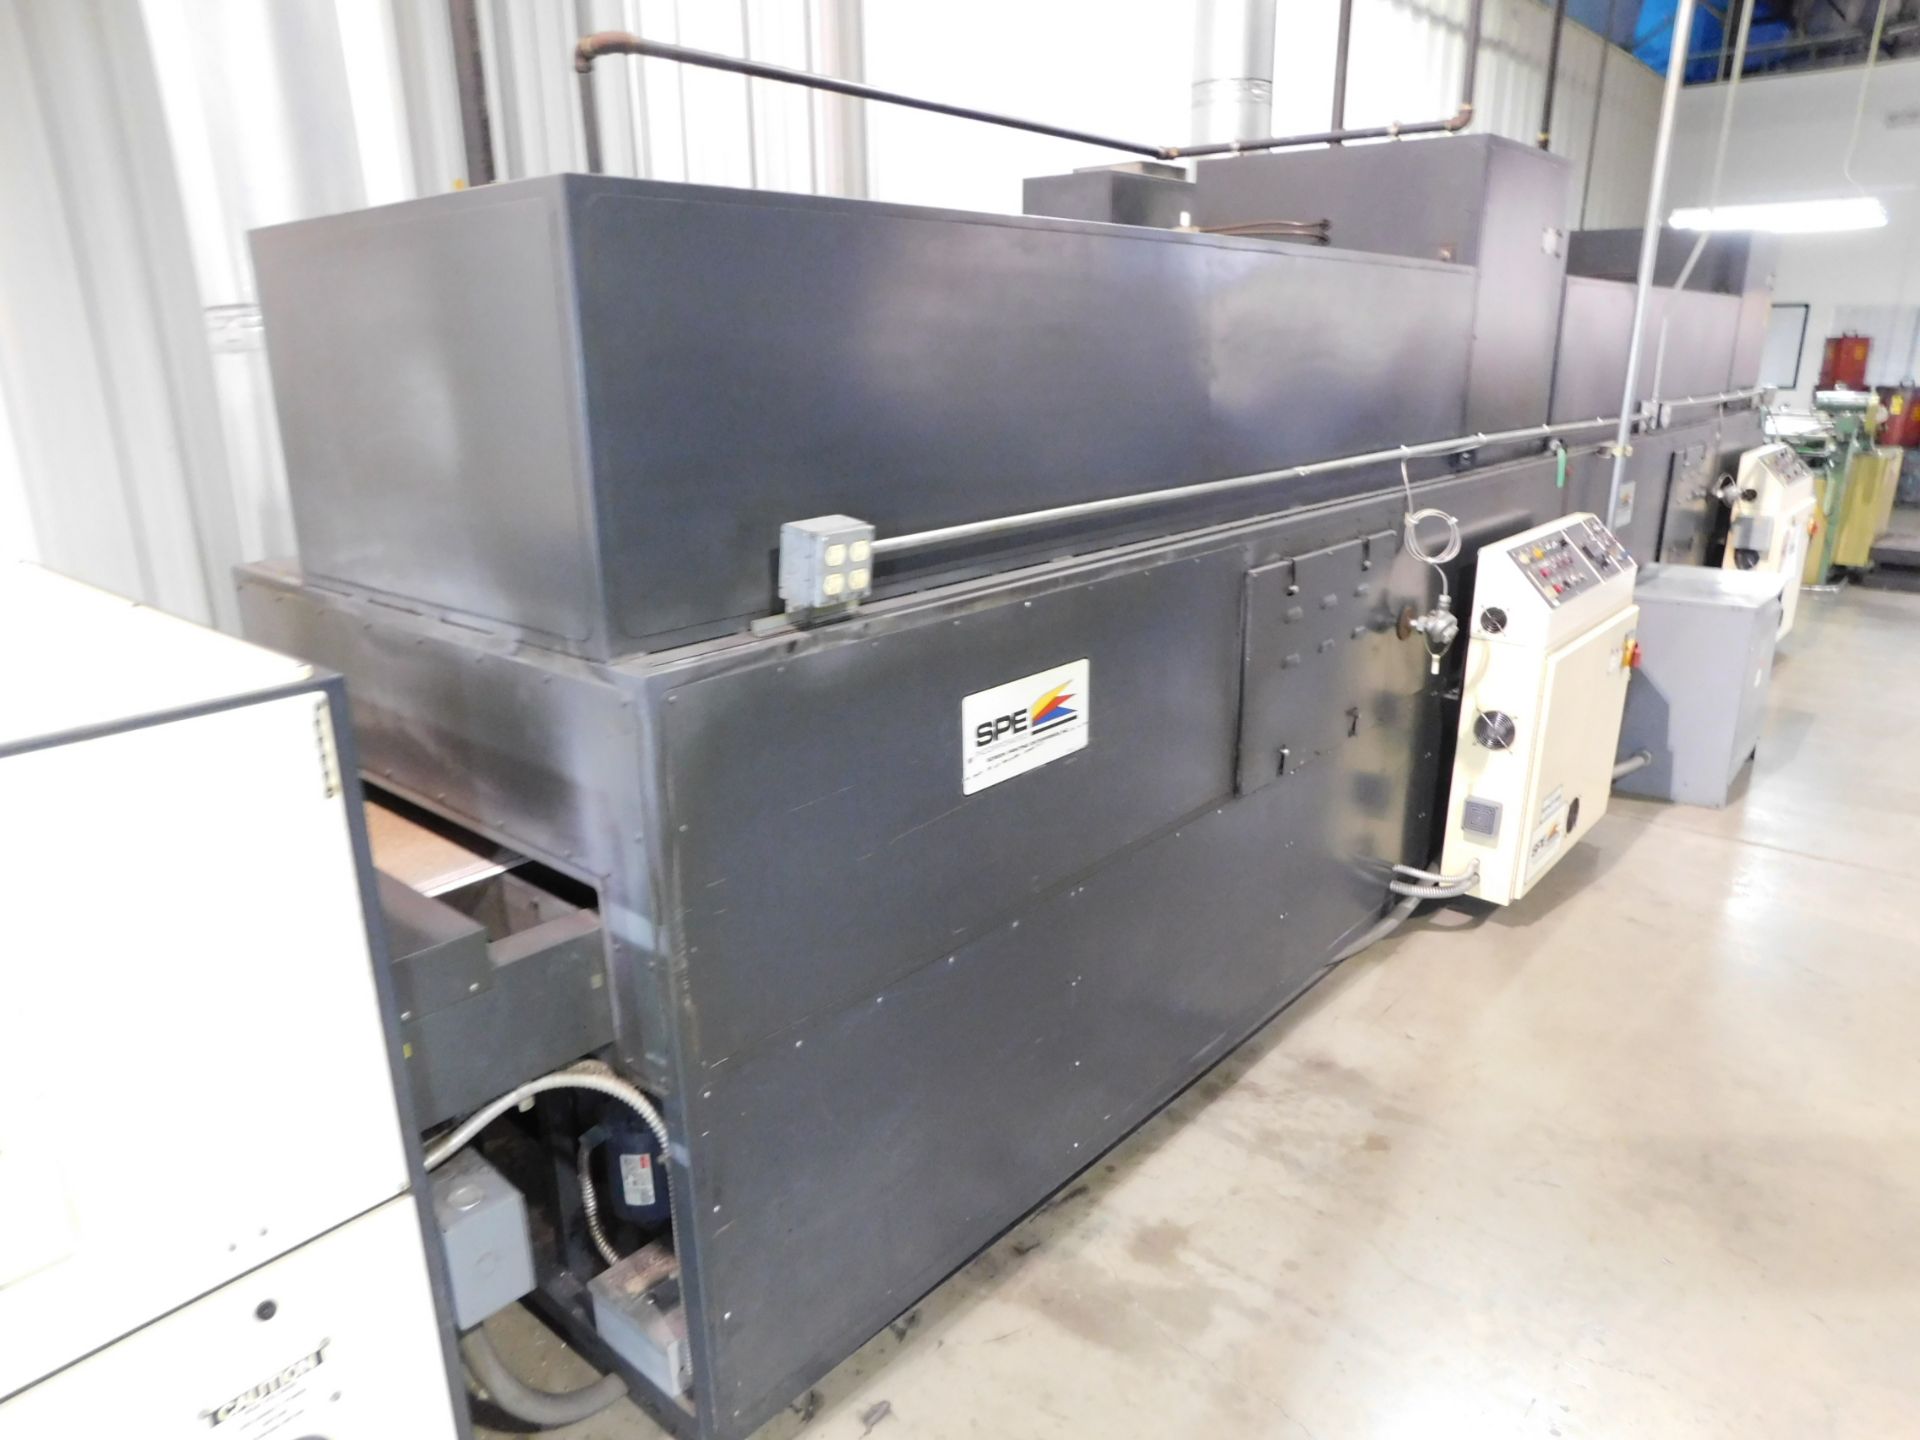 Drying Line Consisting of SPE UV Curing Oven, SPE Millenium 305-2-IS UV Curing Reactor, s/n 4825- - Image 6 of 13